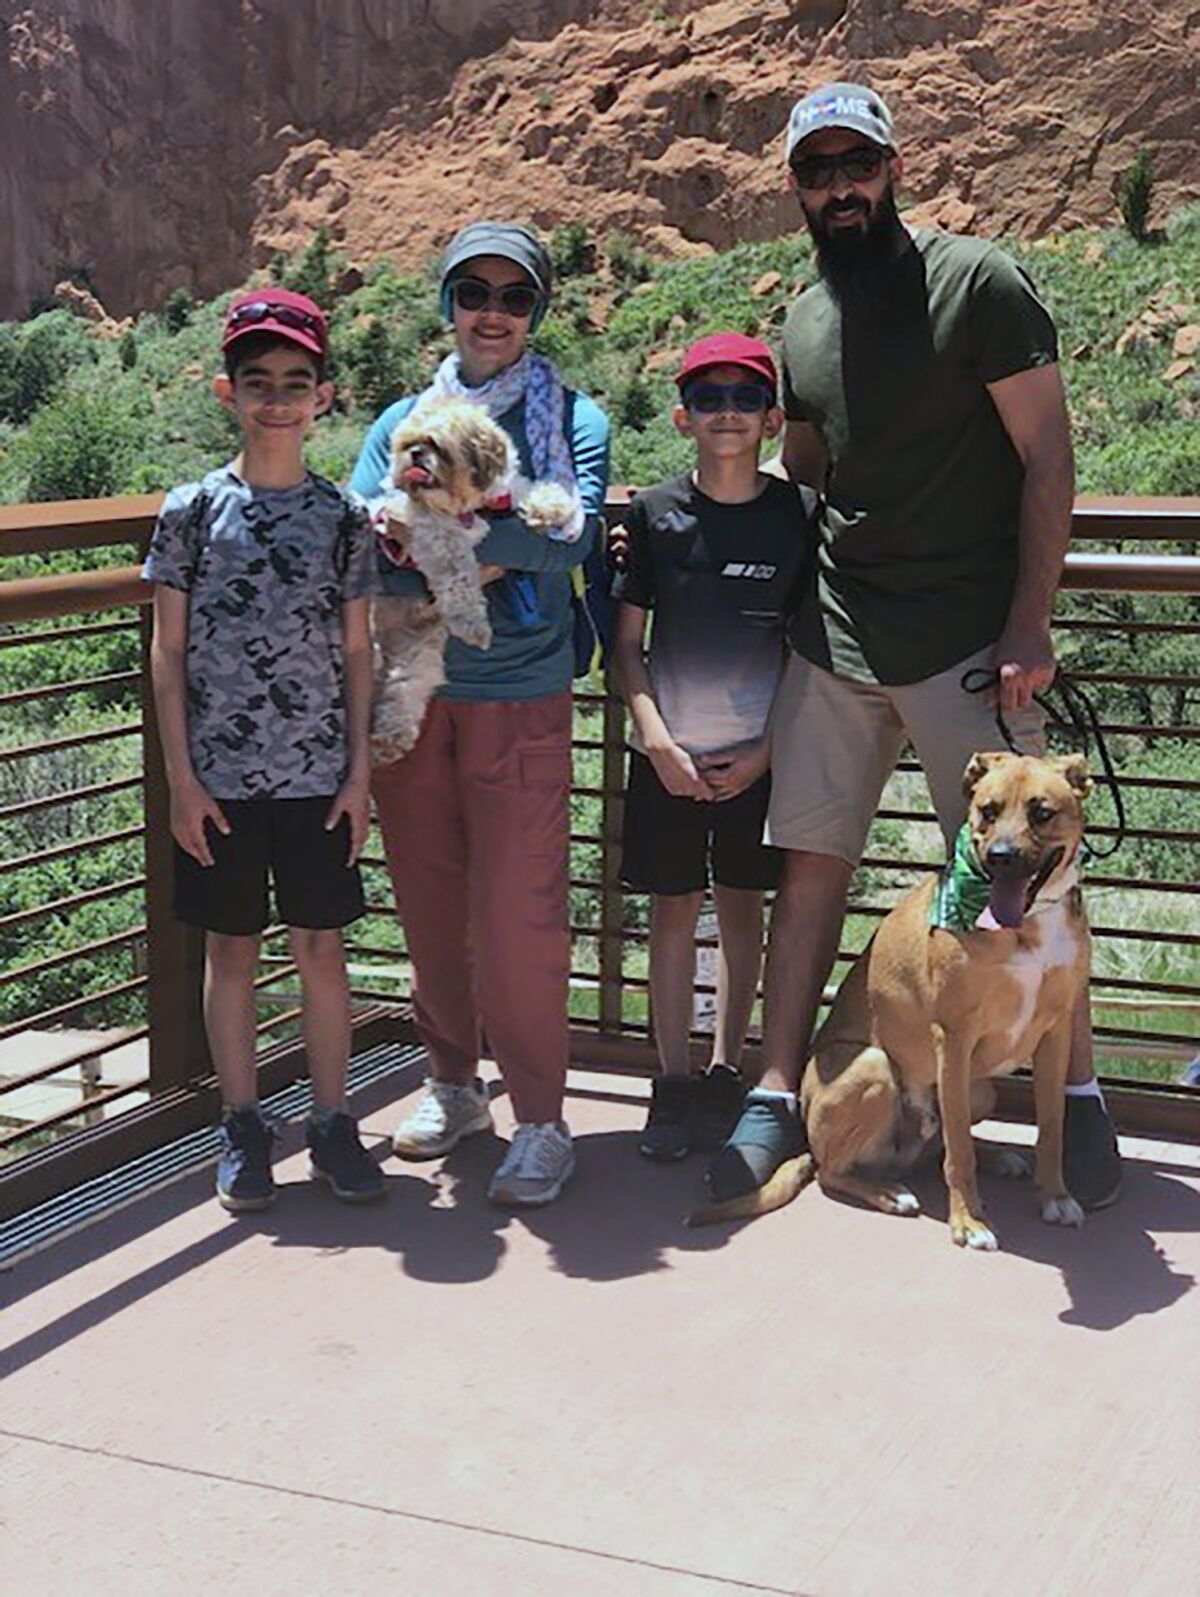 In this provided photo, the Alkhafajis family, from left to right: Jay, Rasha and their dog, Ganosh, Ali, Mousa and their dog, Hero pose for a picture at the Garden of the Gods in Colorado Springs, Colorado. Thousands of Airbnb hosts have agreed to house refugees as part of the online lodging marketplace’s philanthropic program to provide emergency temporary housing to those who need it. (Courtesy of Mousa Alkhafaji via AP)